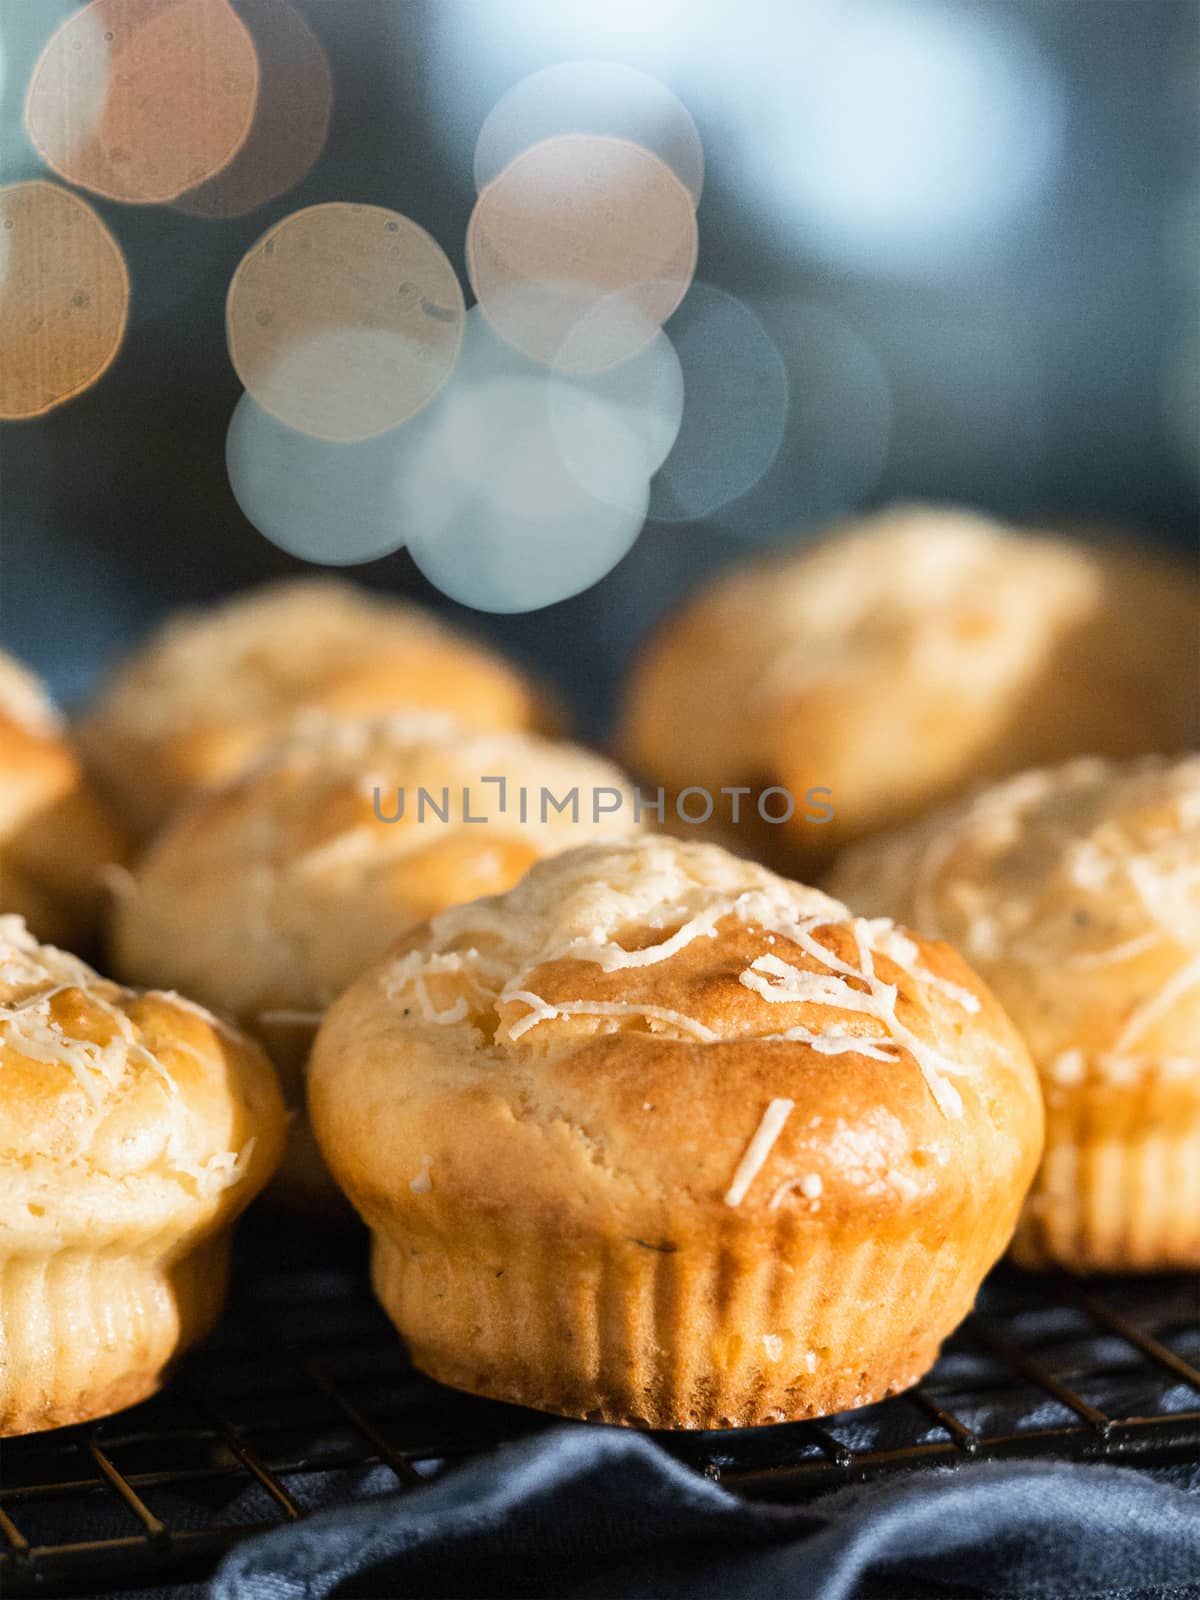 Delicious savory salted muffins with cream cheese, herbs and spices, topping grated parmesan. Cozy autumn winter pastries with festive bokeh background. Copy space for text or design. Vertical